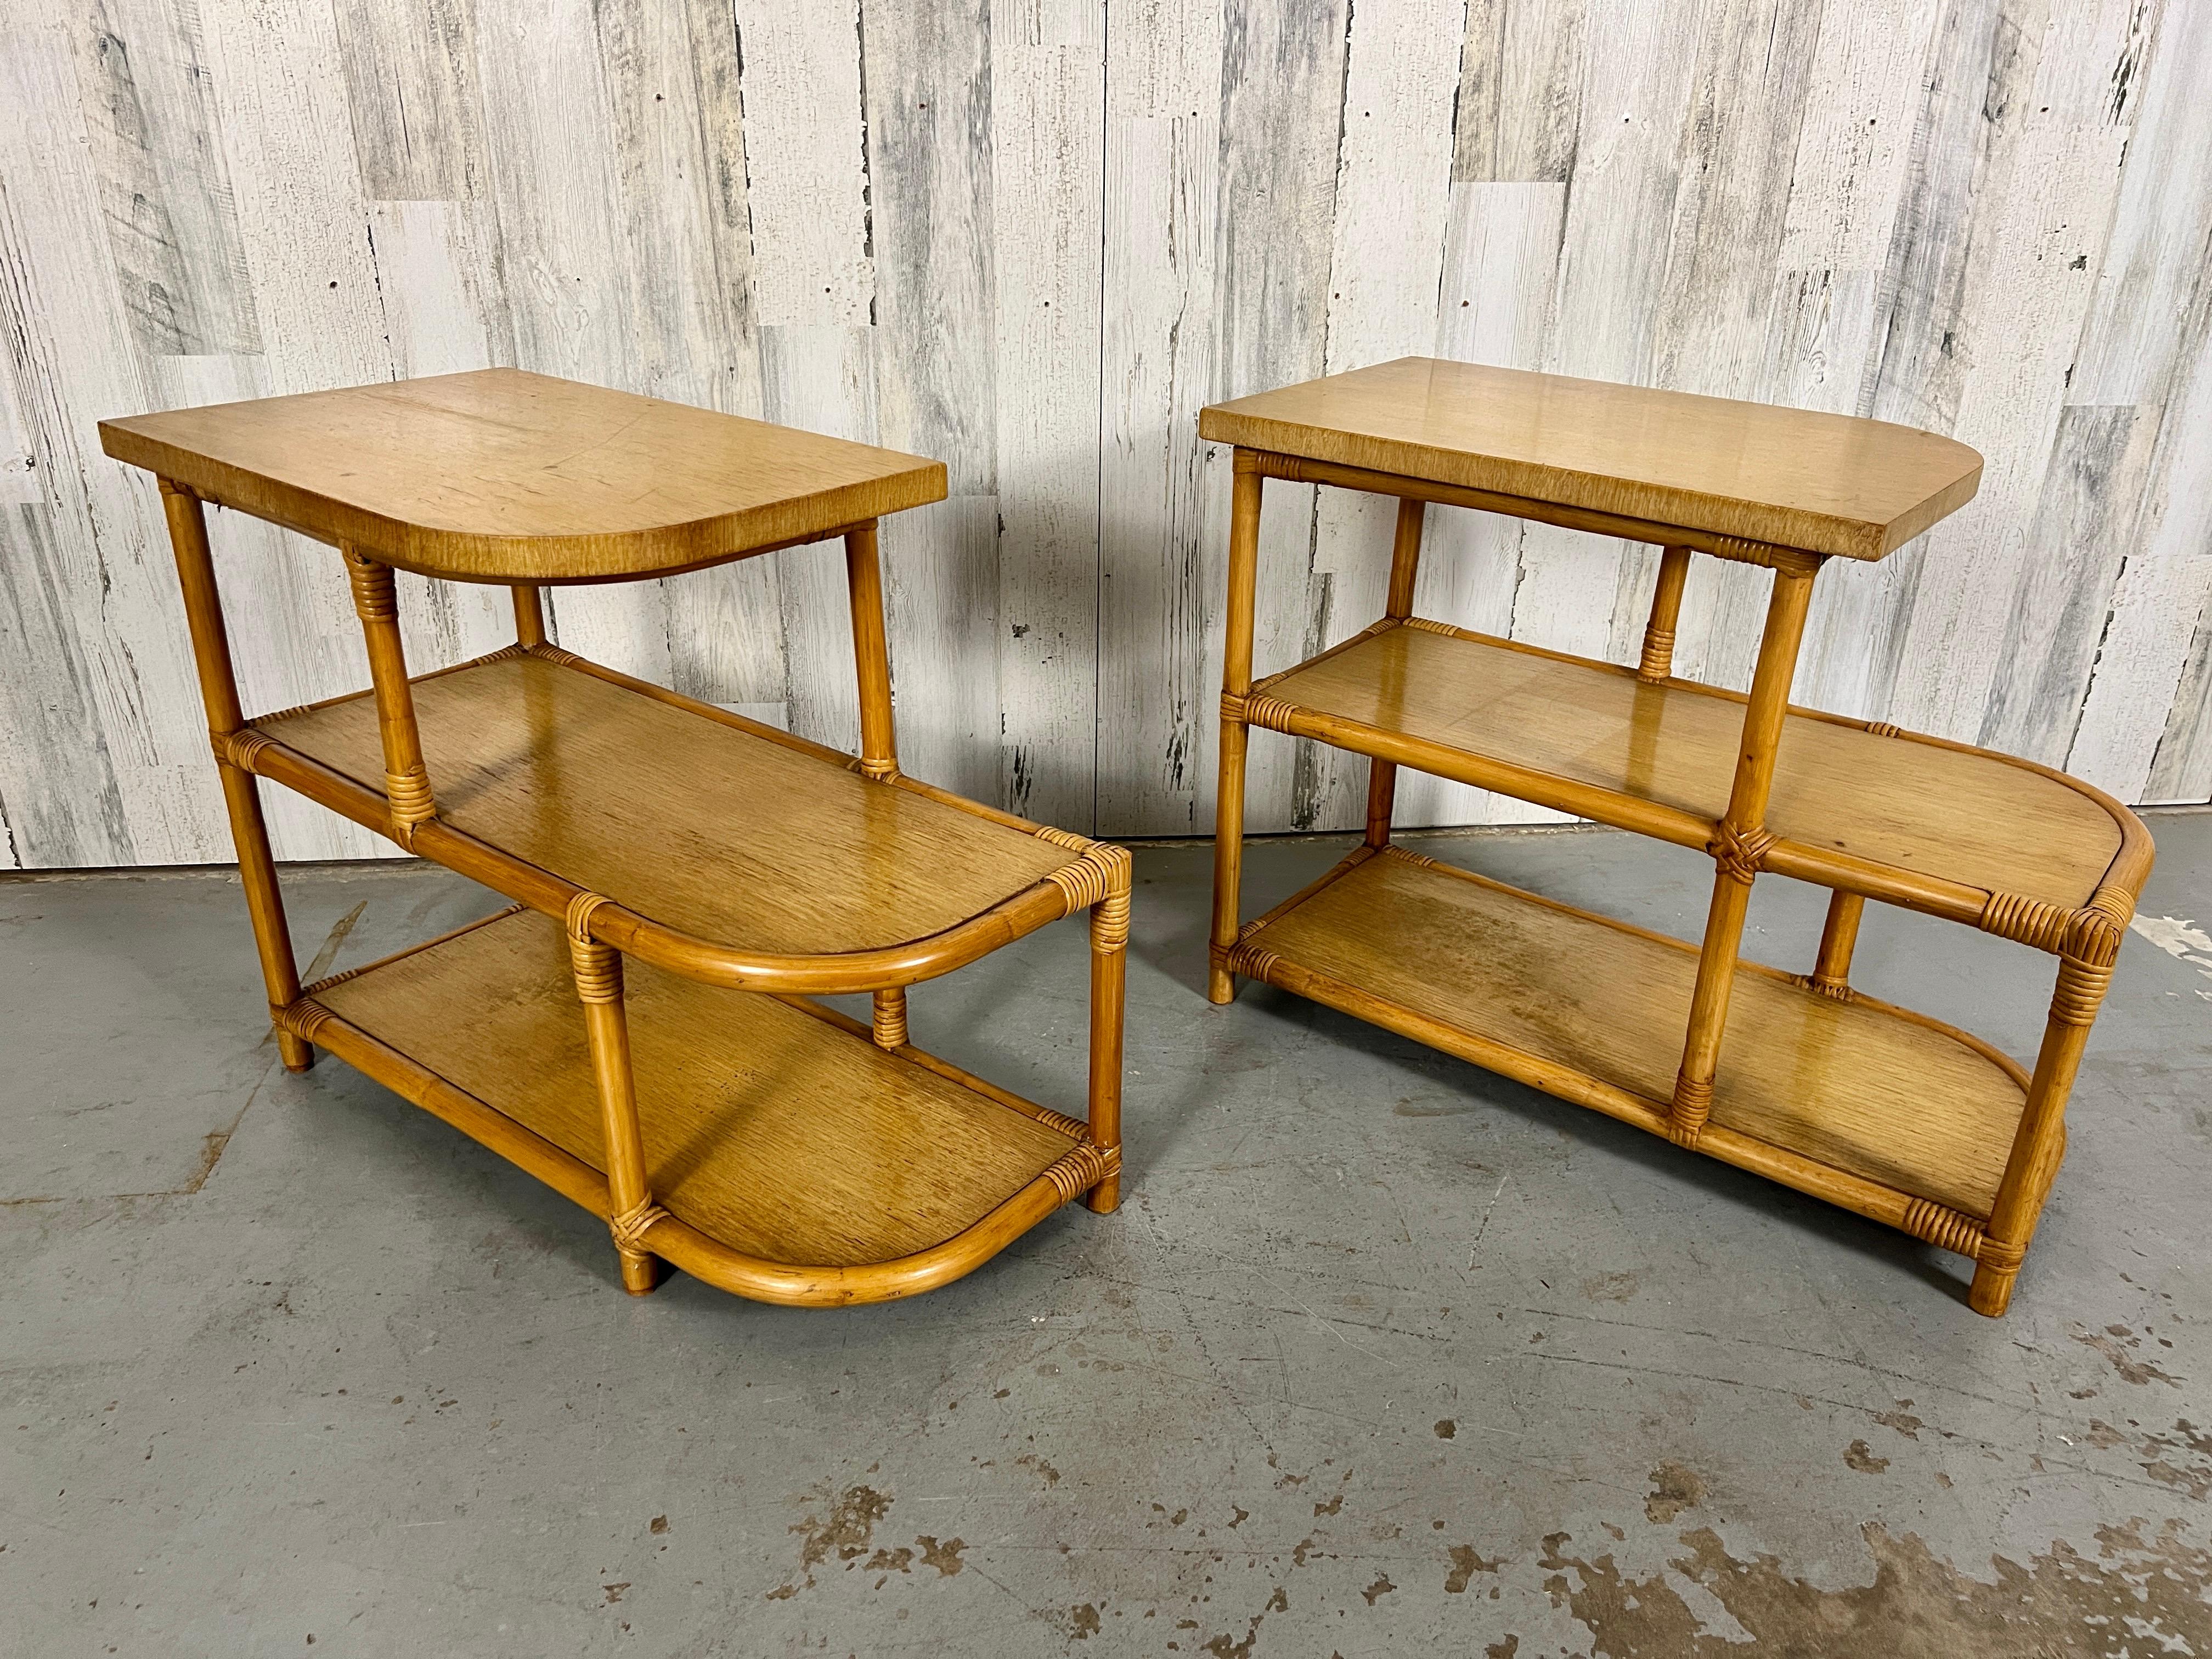 Petit end tables of rattan and bleached mahogany in the style of Paul Frankl.
Classic 1950's rounded design two tiered tables.